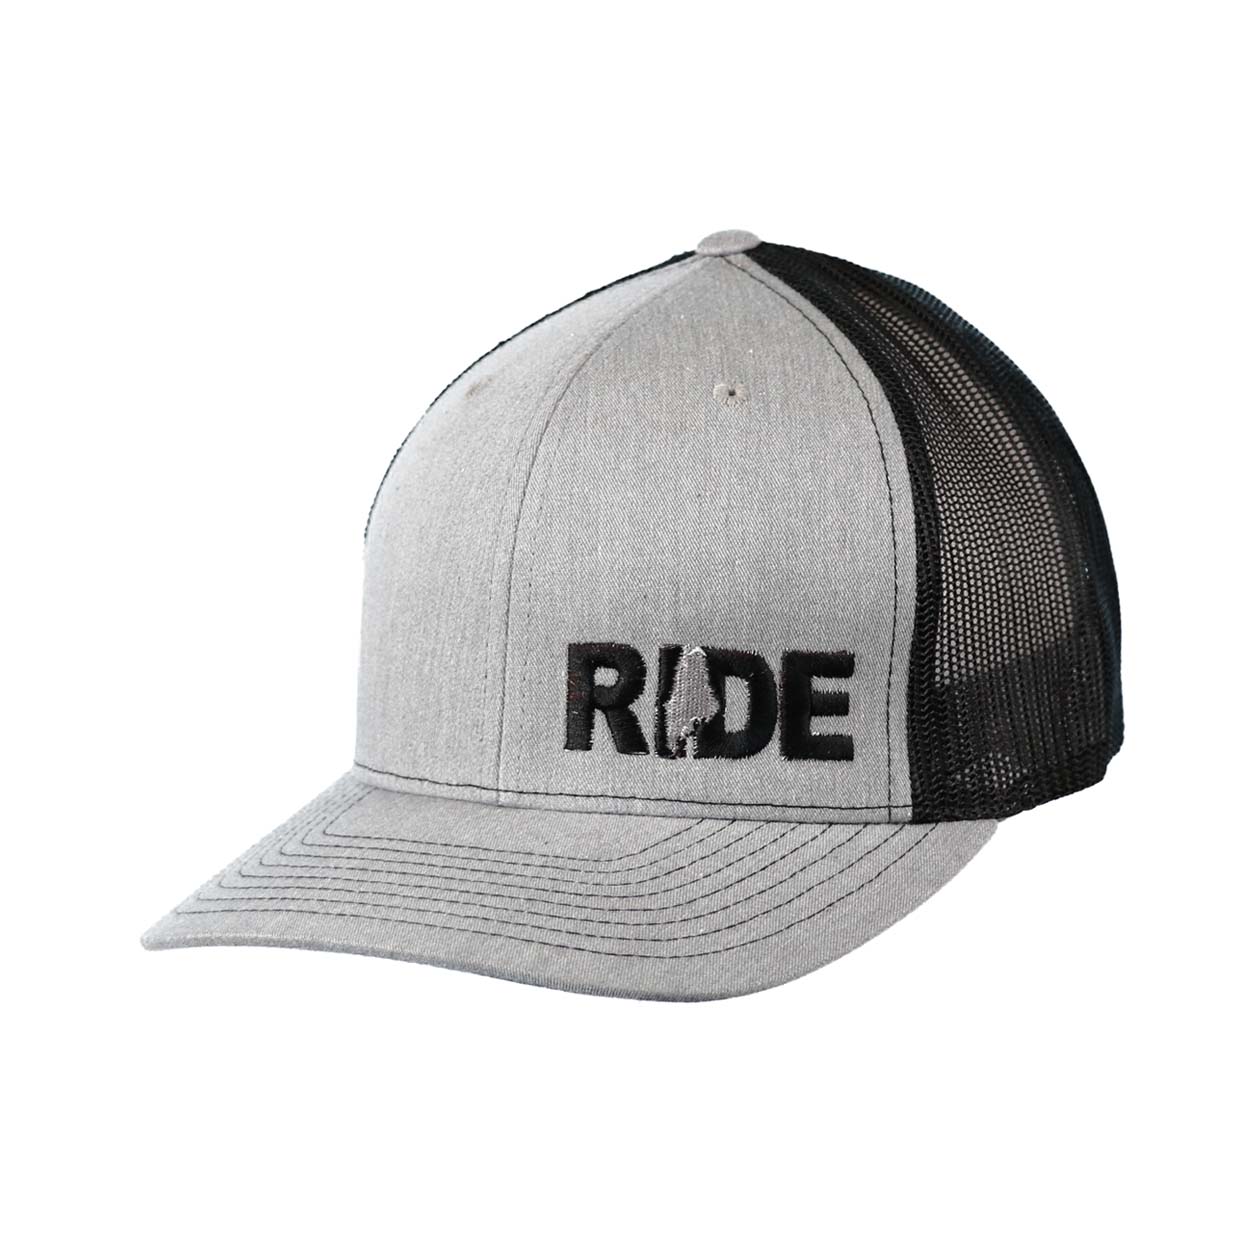 Ride Maine Night Out Embroidered Snapback Trucker Hat Heather Gray/Black